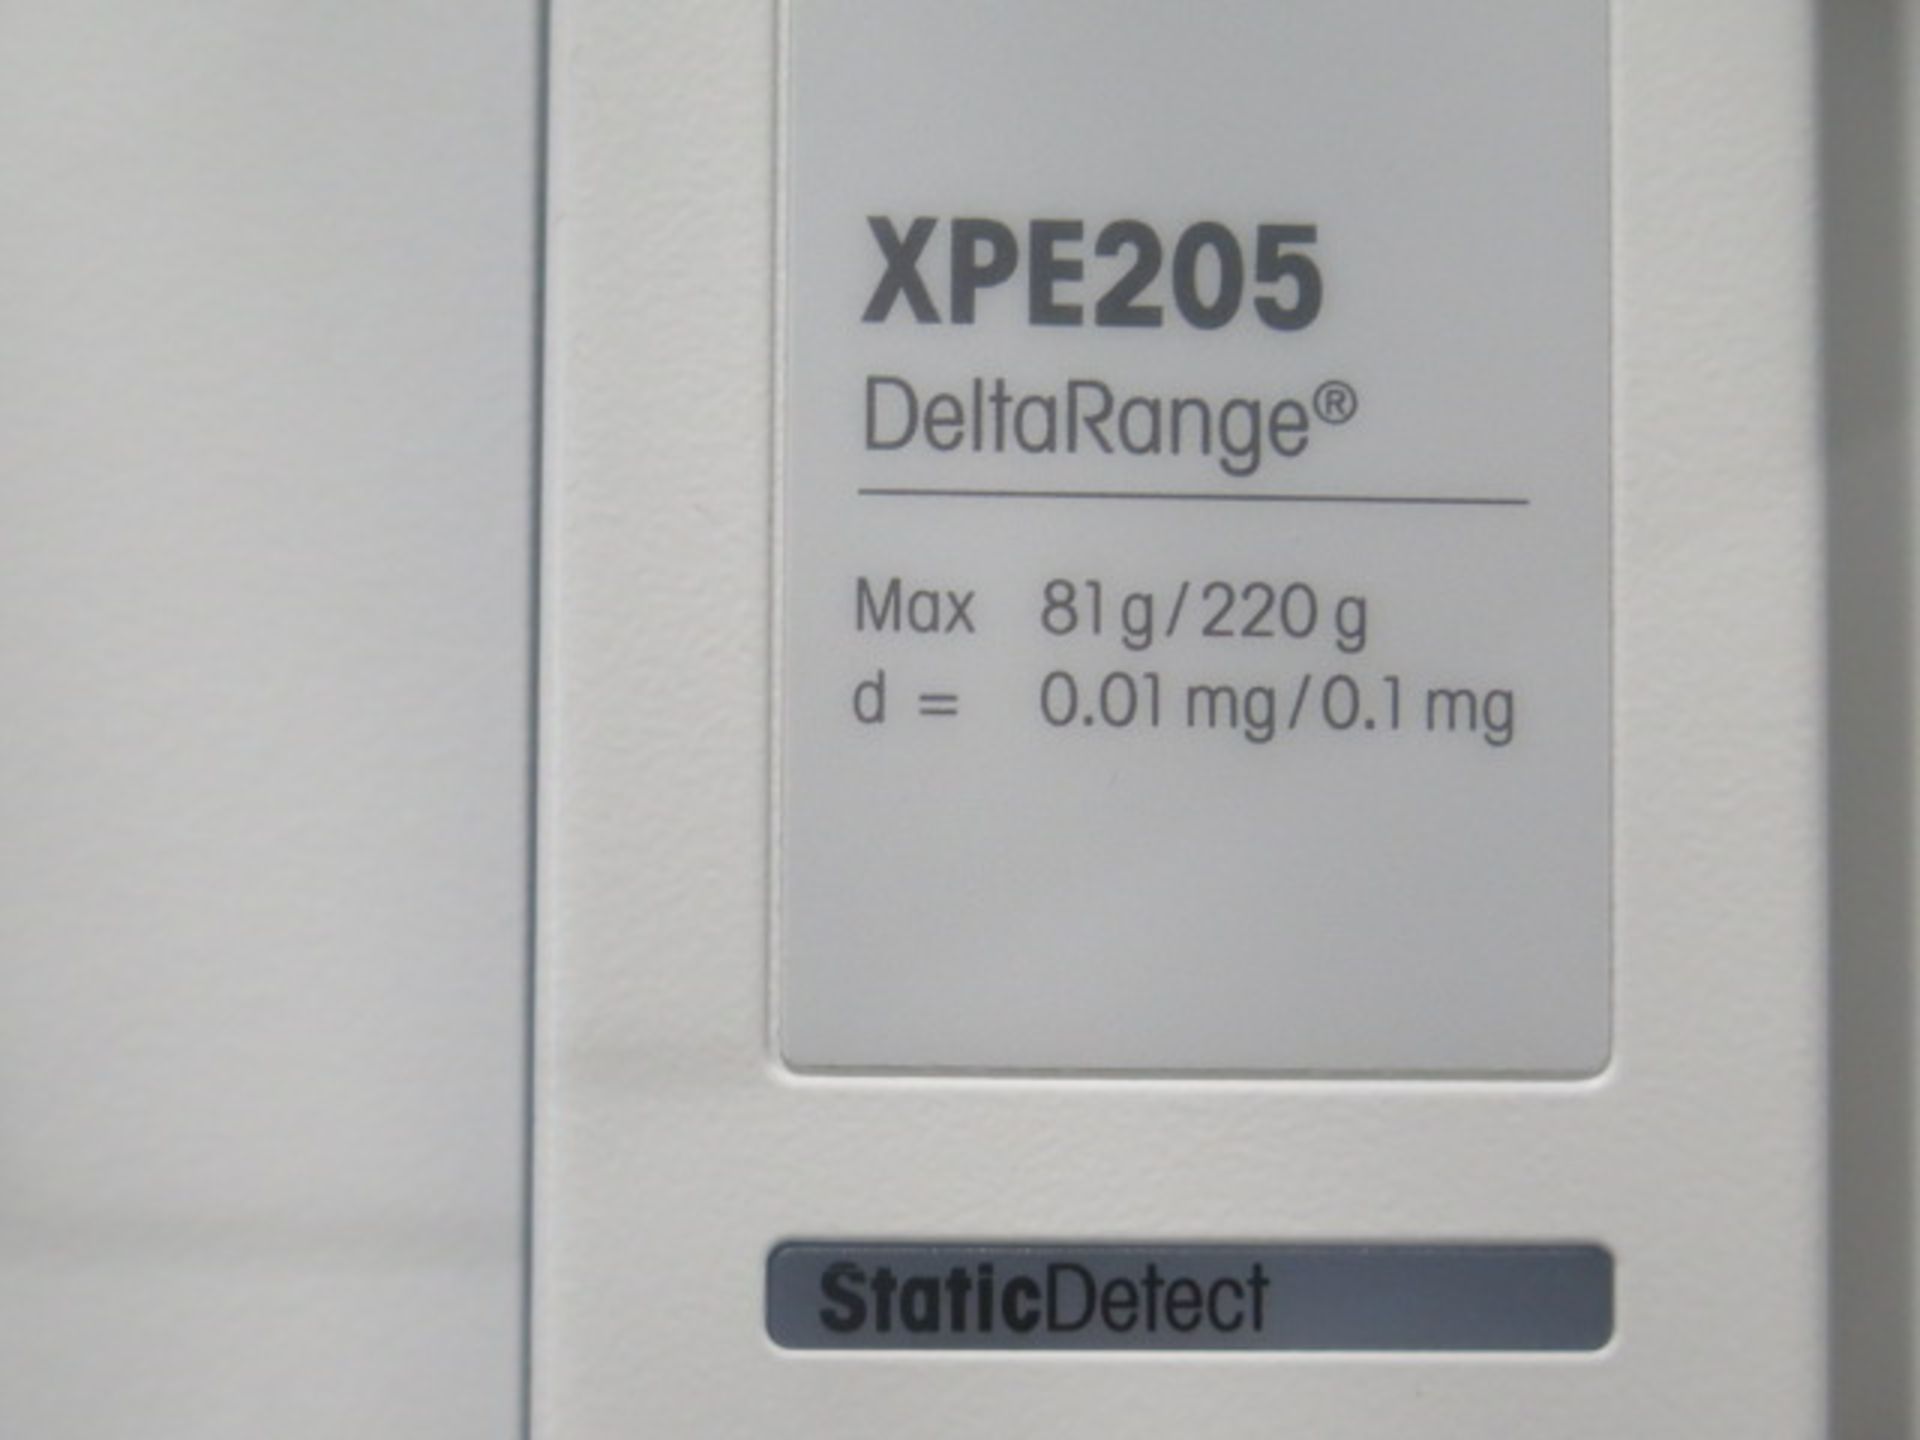 Mettler Toledo XPE205 DeltaRange Analytical Balance Scale 0.01mg-220g w/ Static Detect, SOLD AS IS - Image 8 of 8